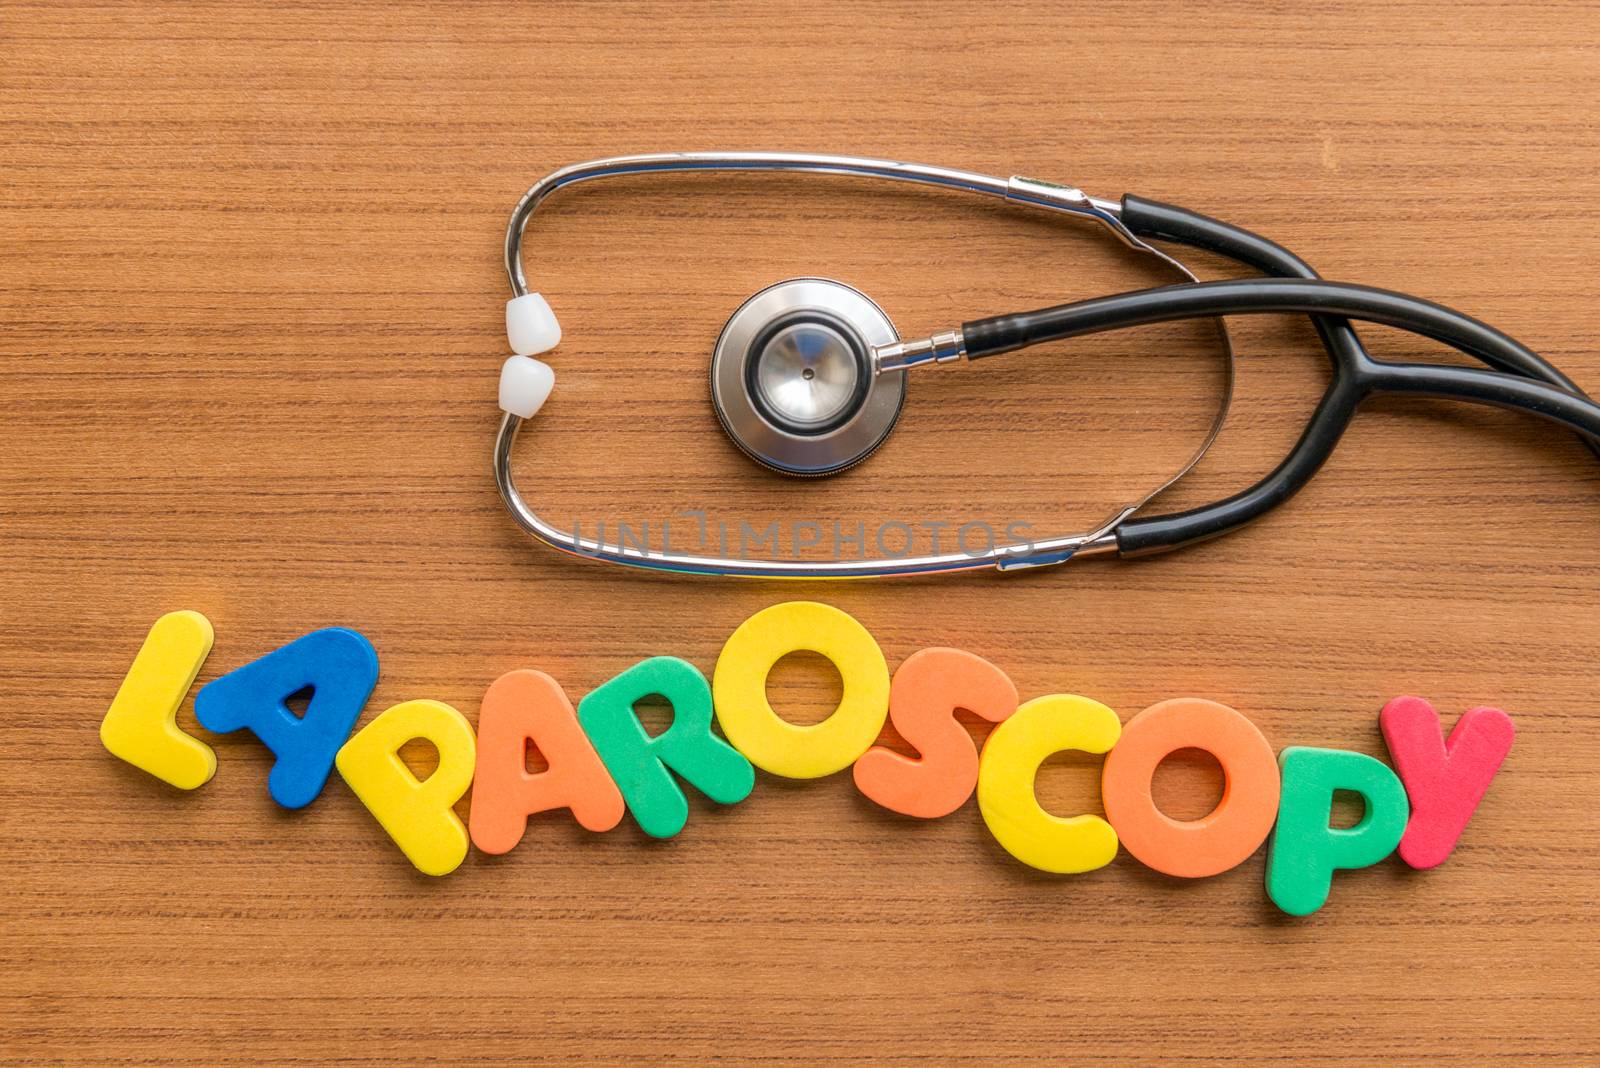 laparoscopy colorful word with Stethoscope on wooden background